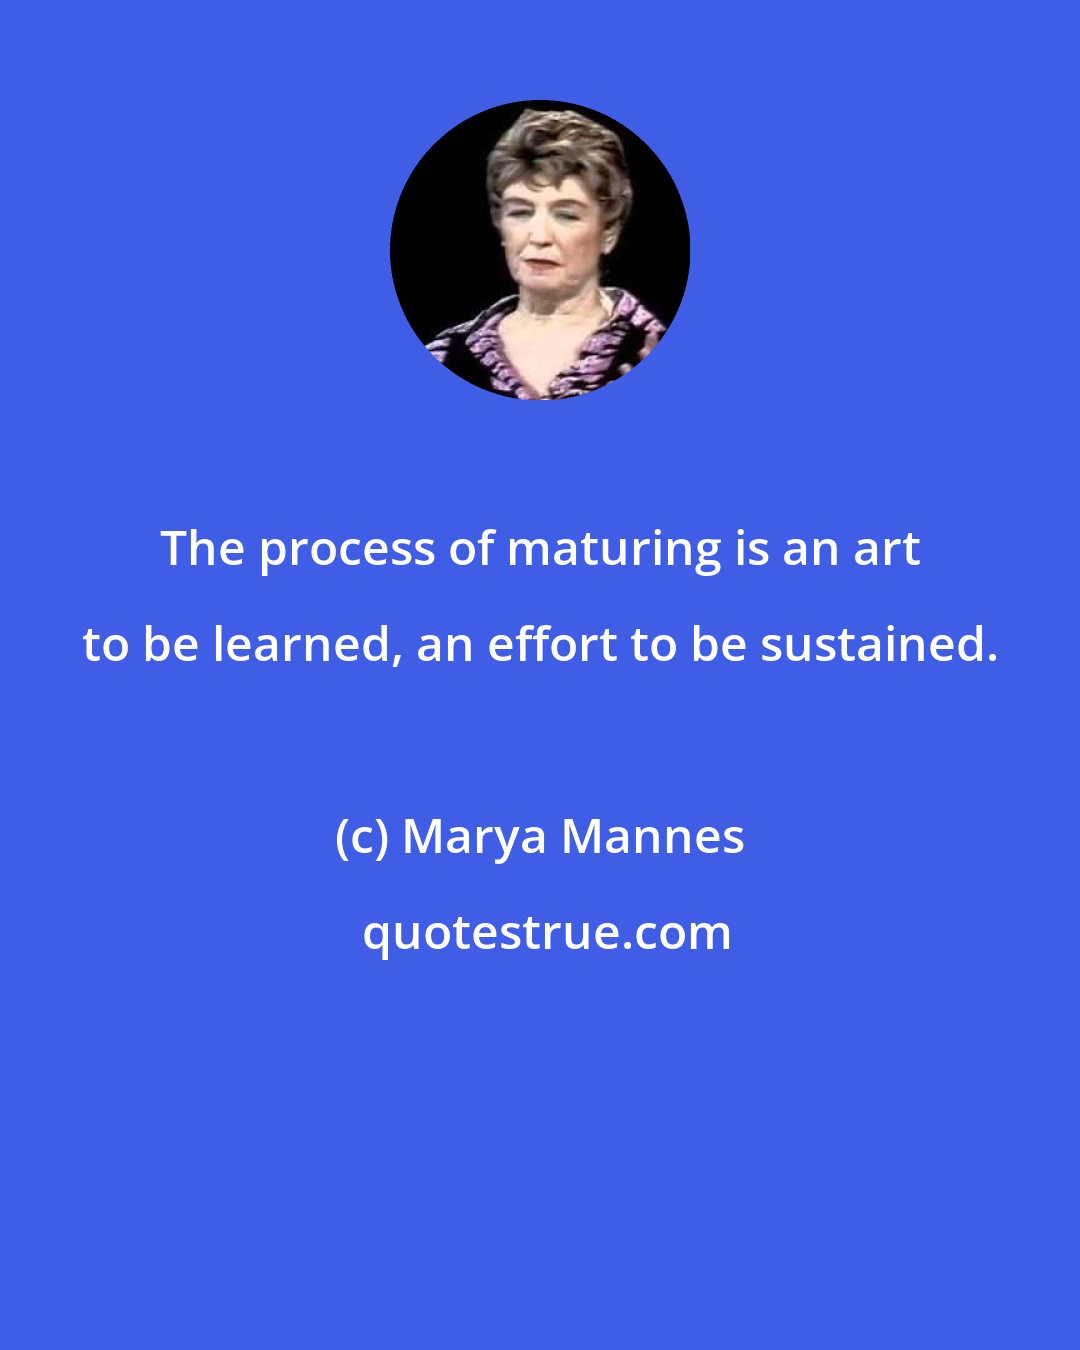 Marya Mannes: The process of maturing is an art to be learned, an effort to be sustained.